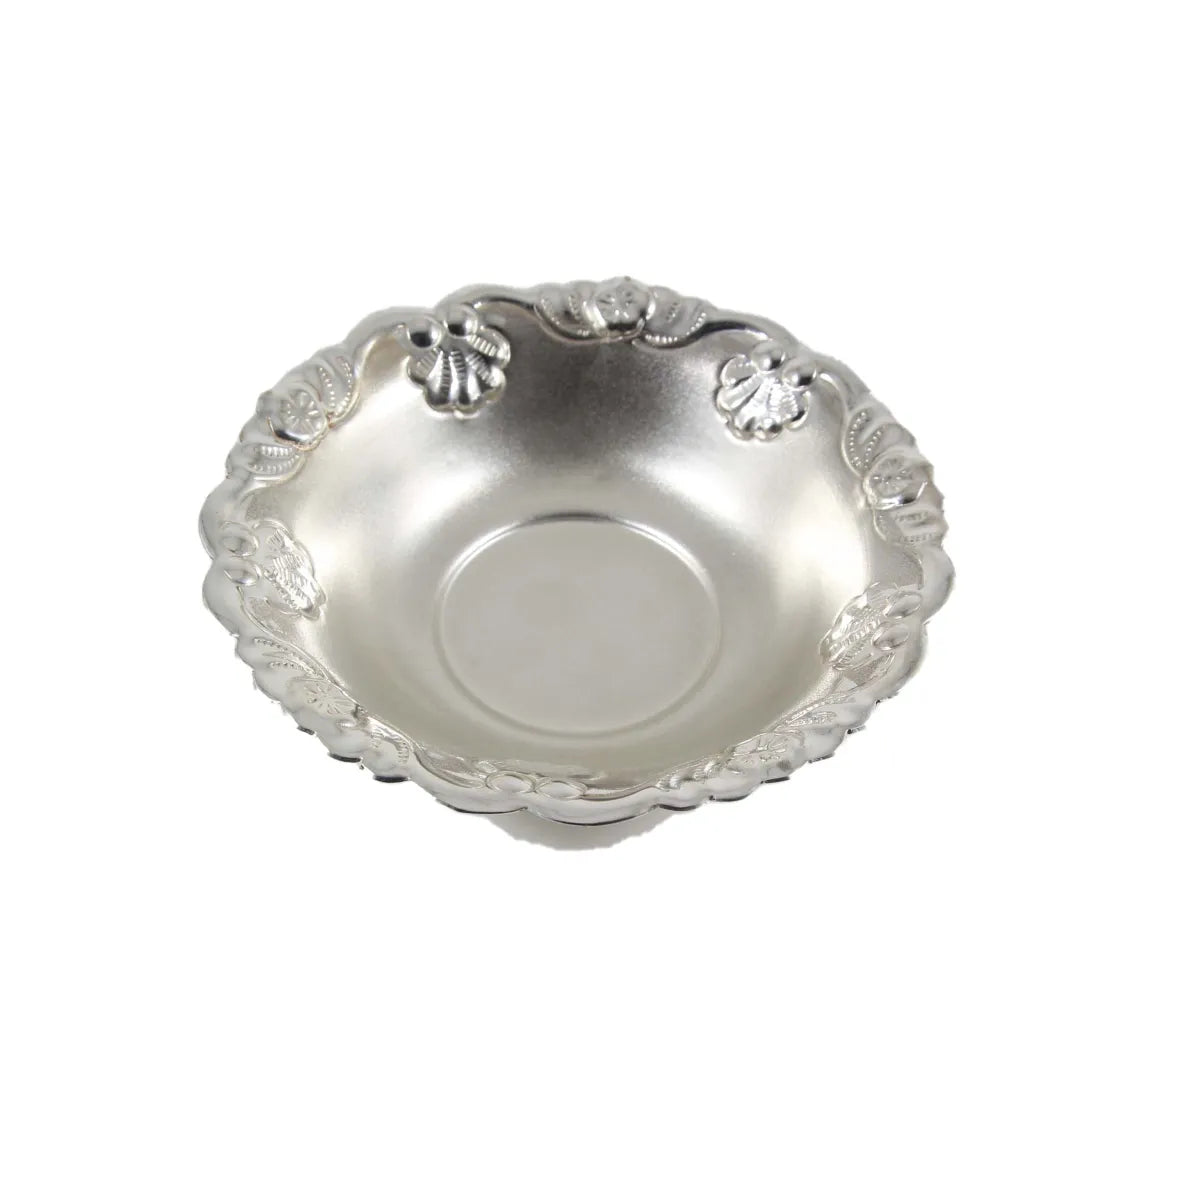 990 Purity Silver Floral Bowl